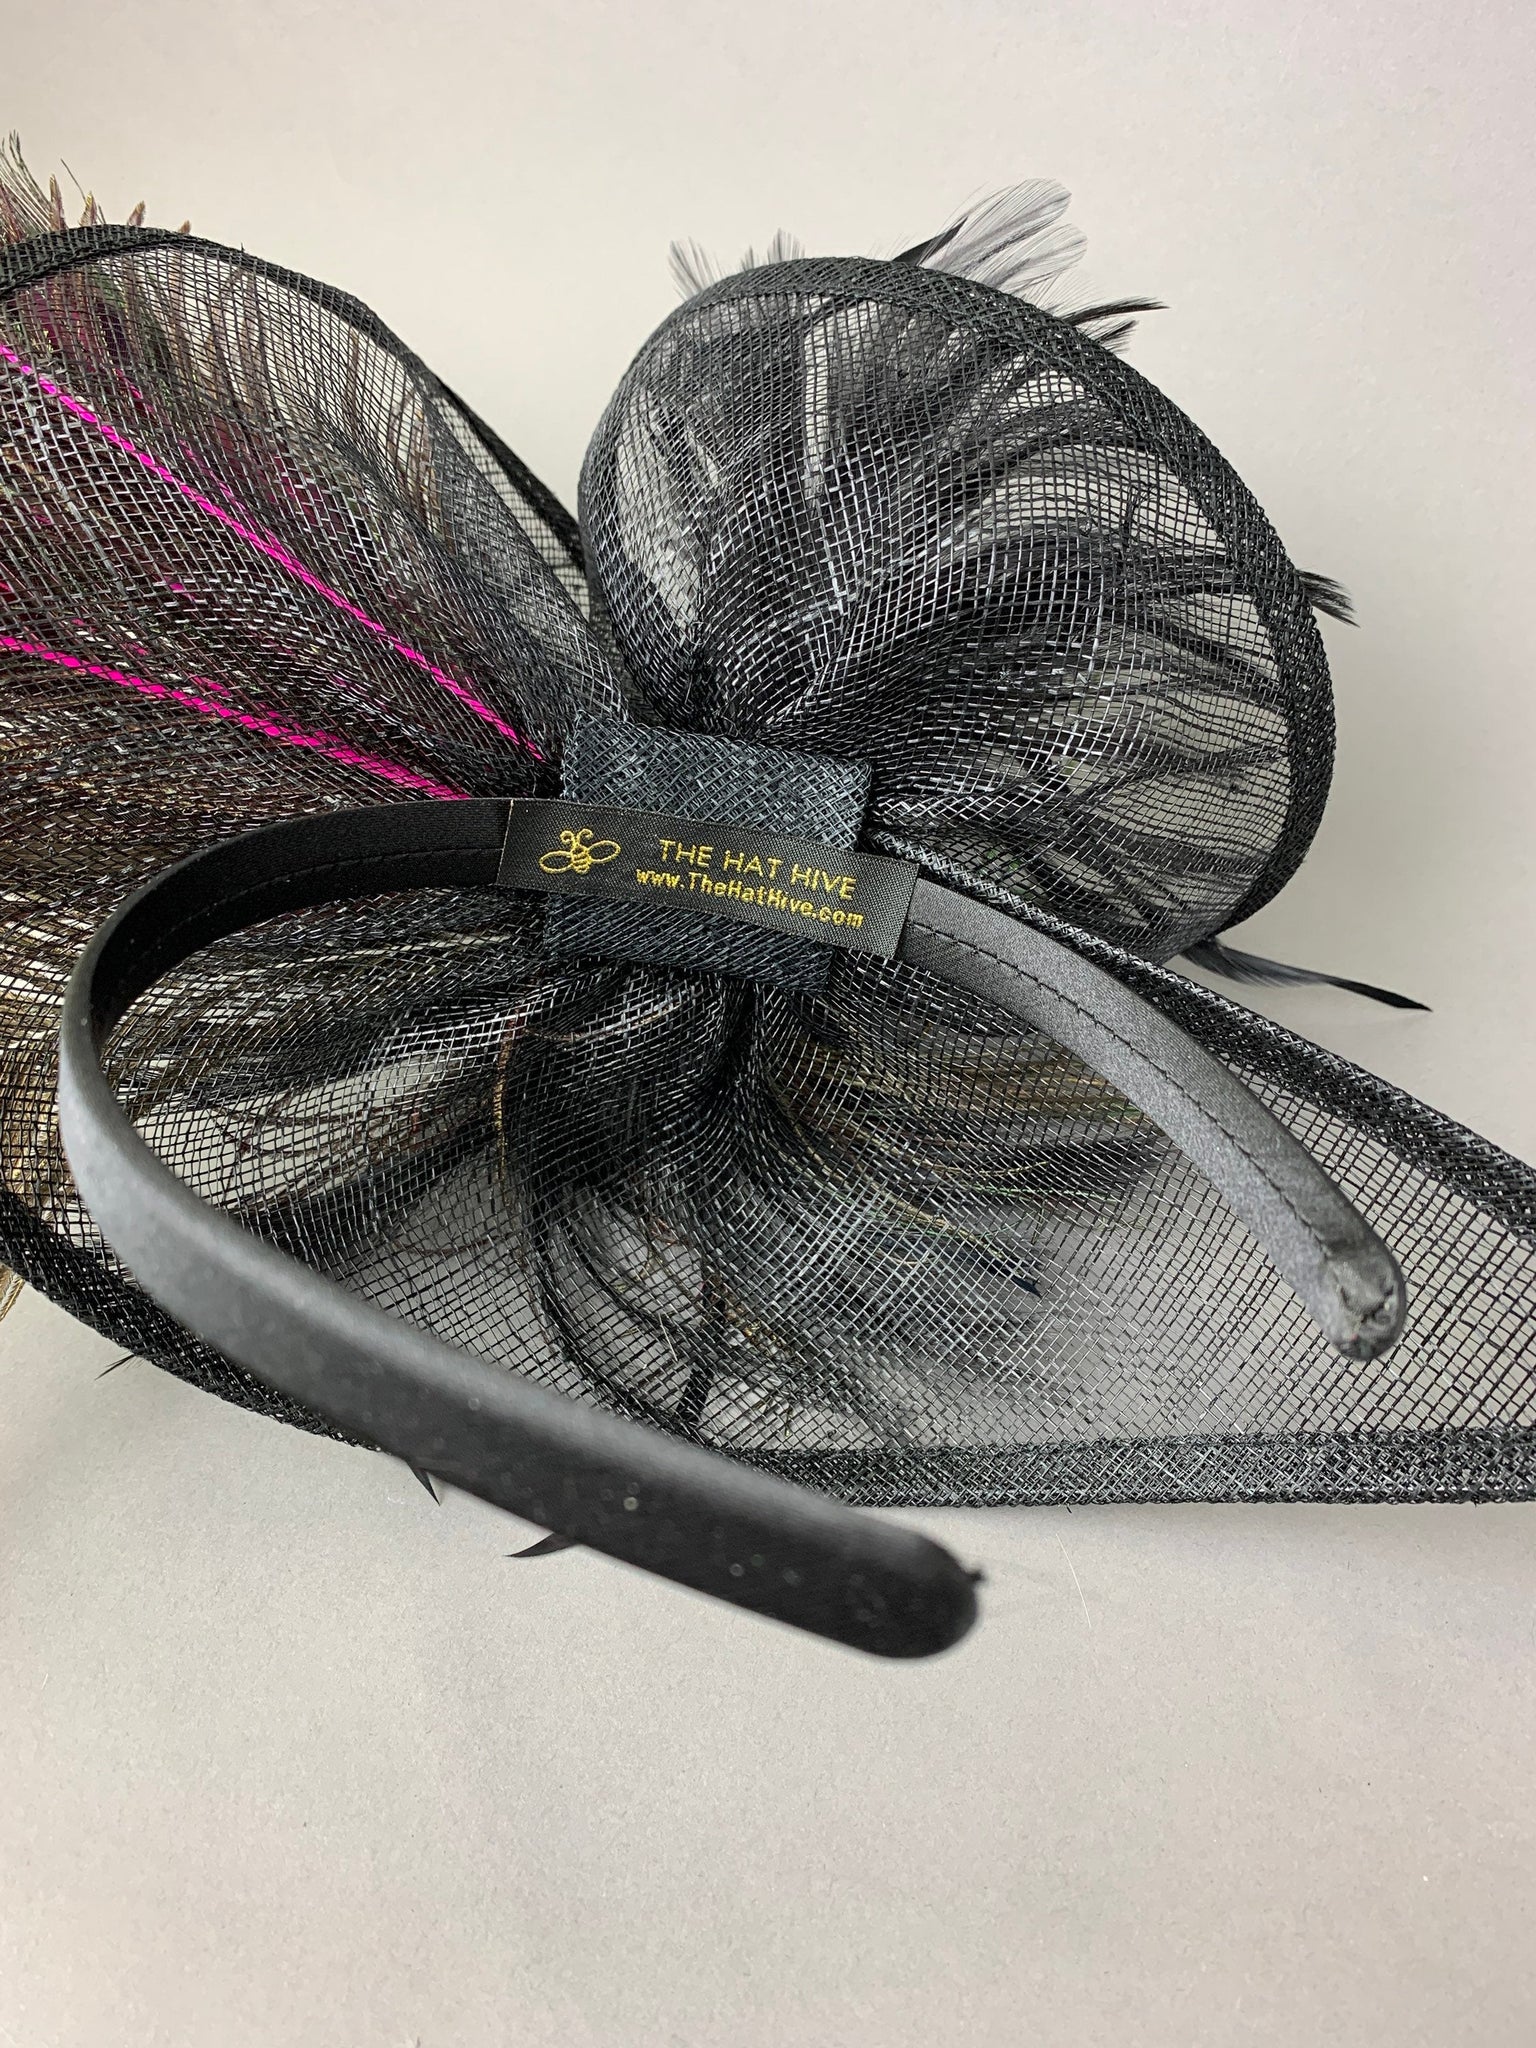 BLACK CRINOLINE HAT WITH PHEASANT FEATHERS – The Hat Hive